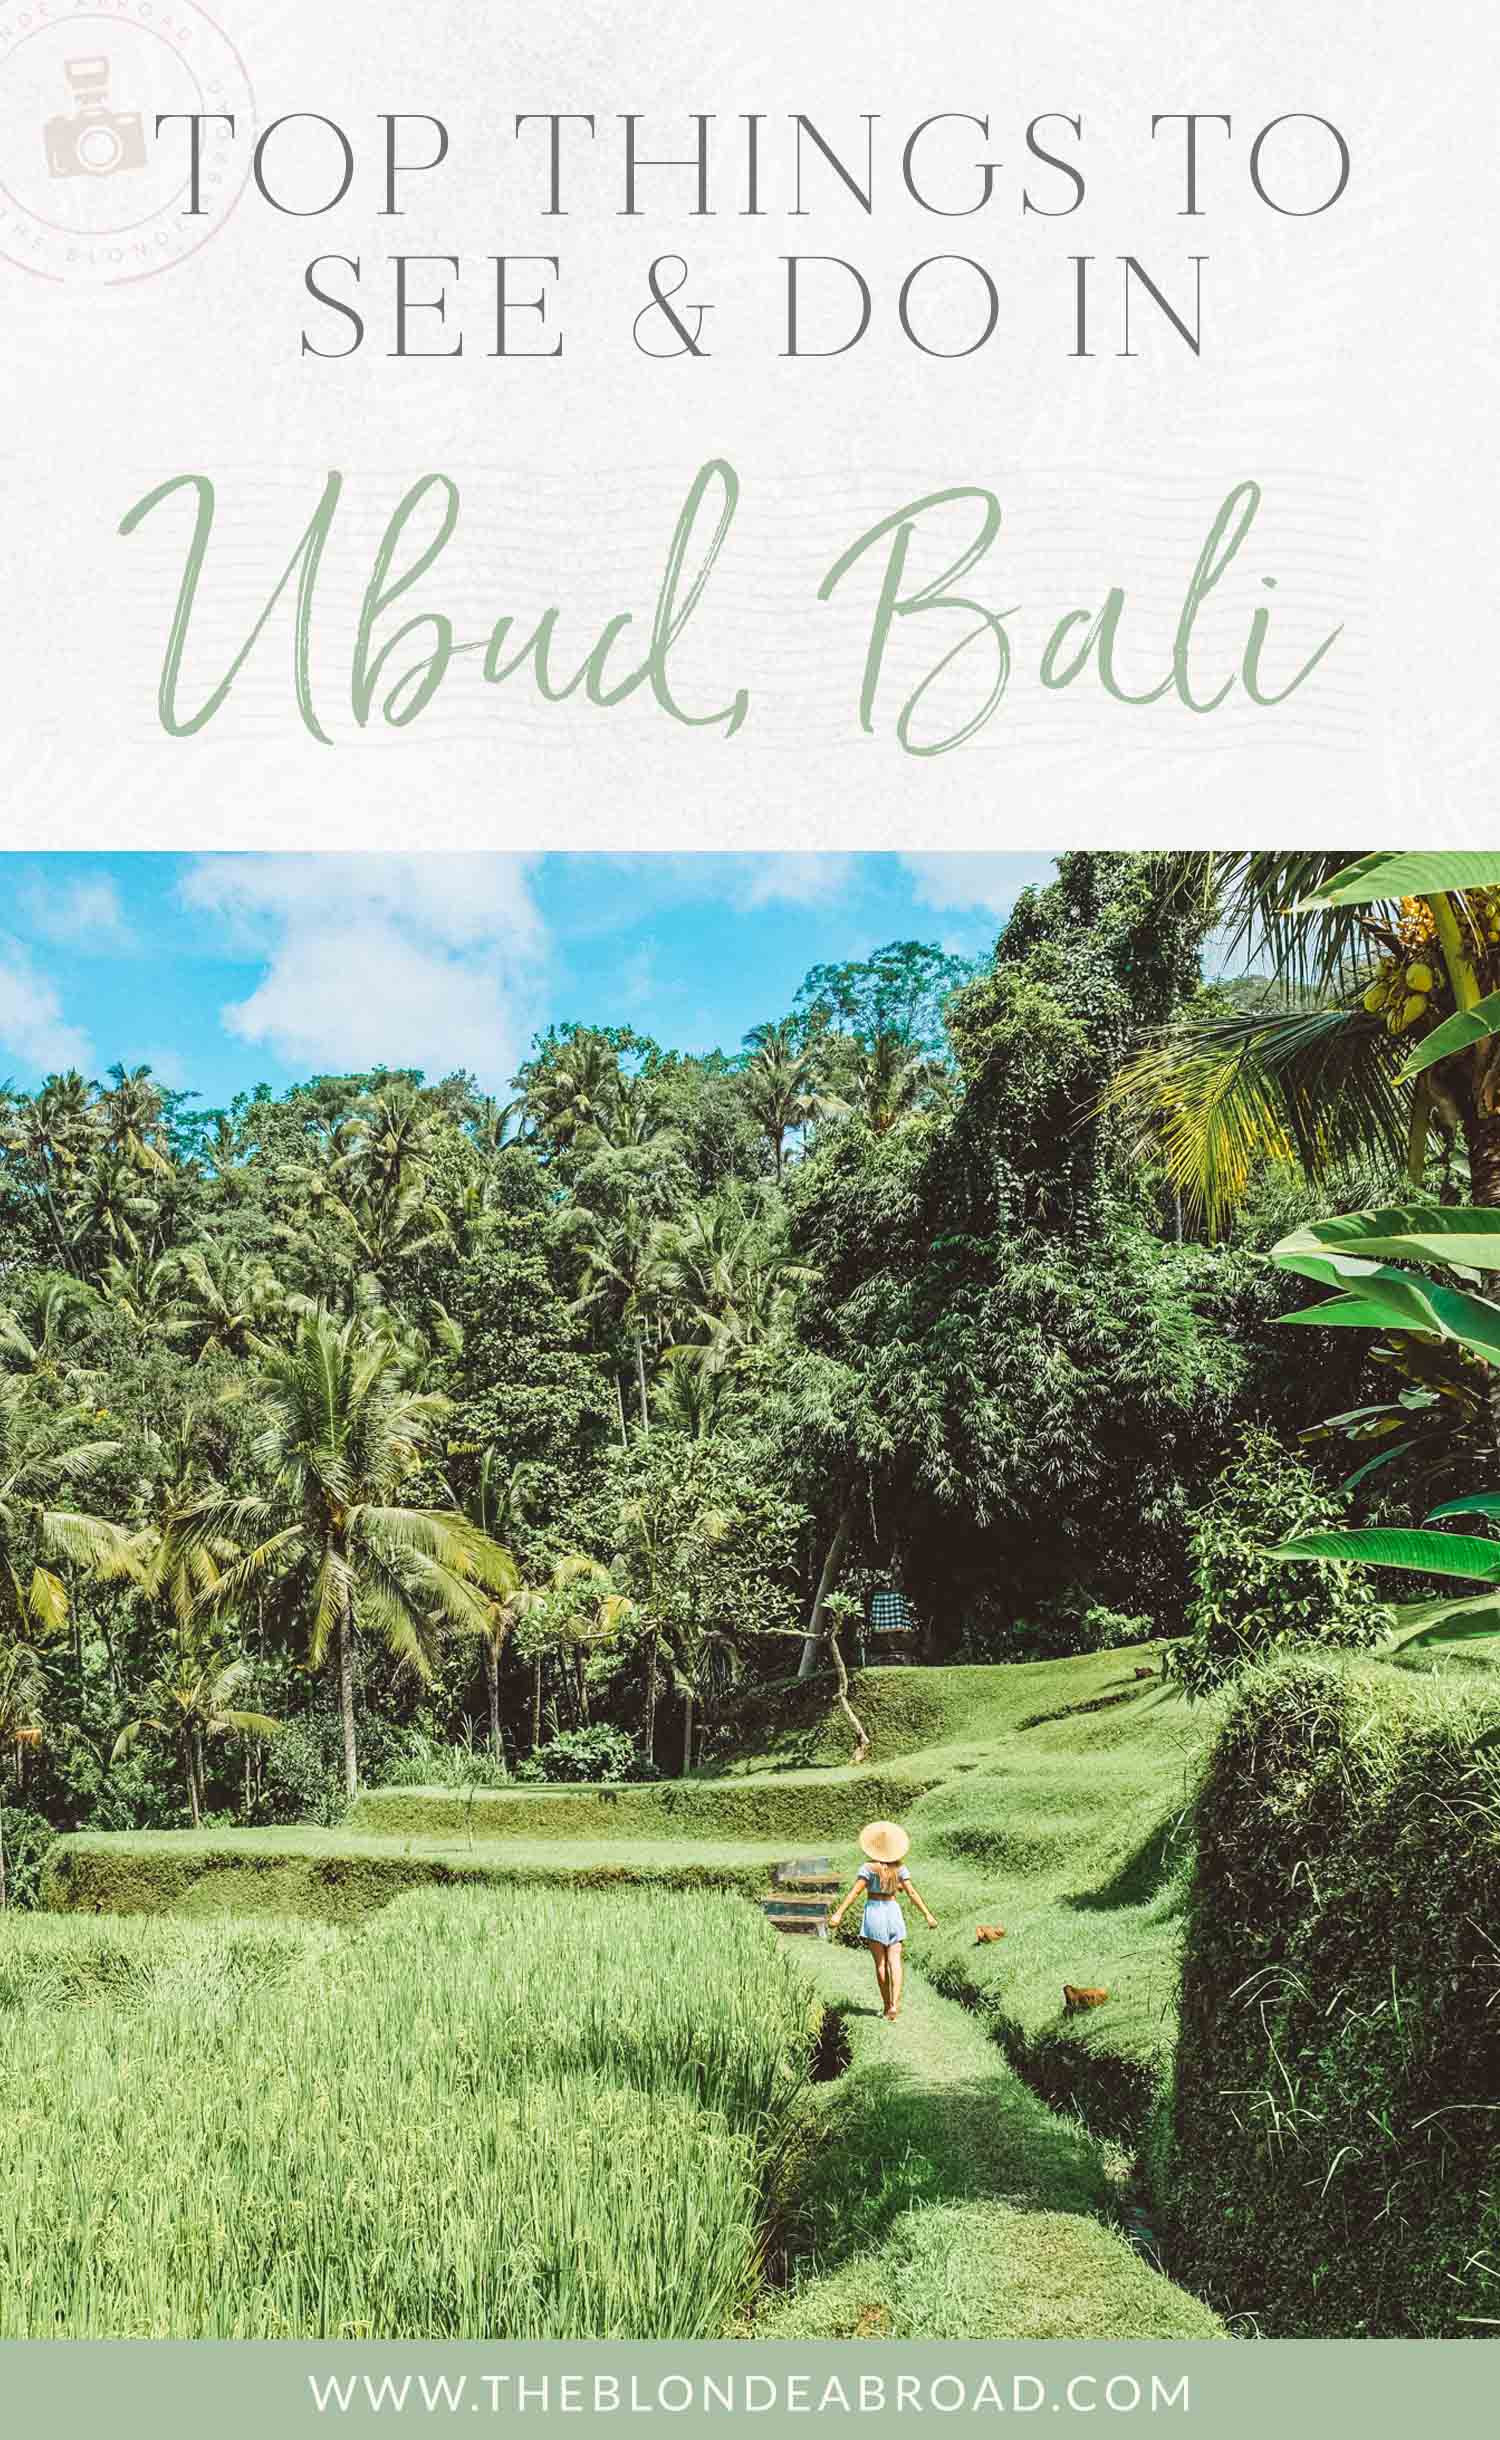 Top Things to See and Do Ubud Bali